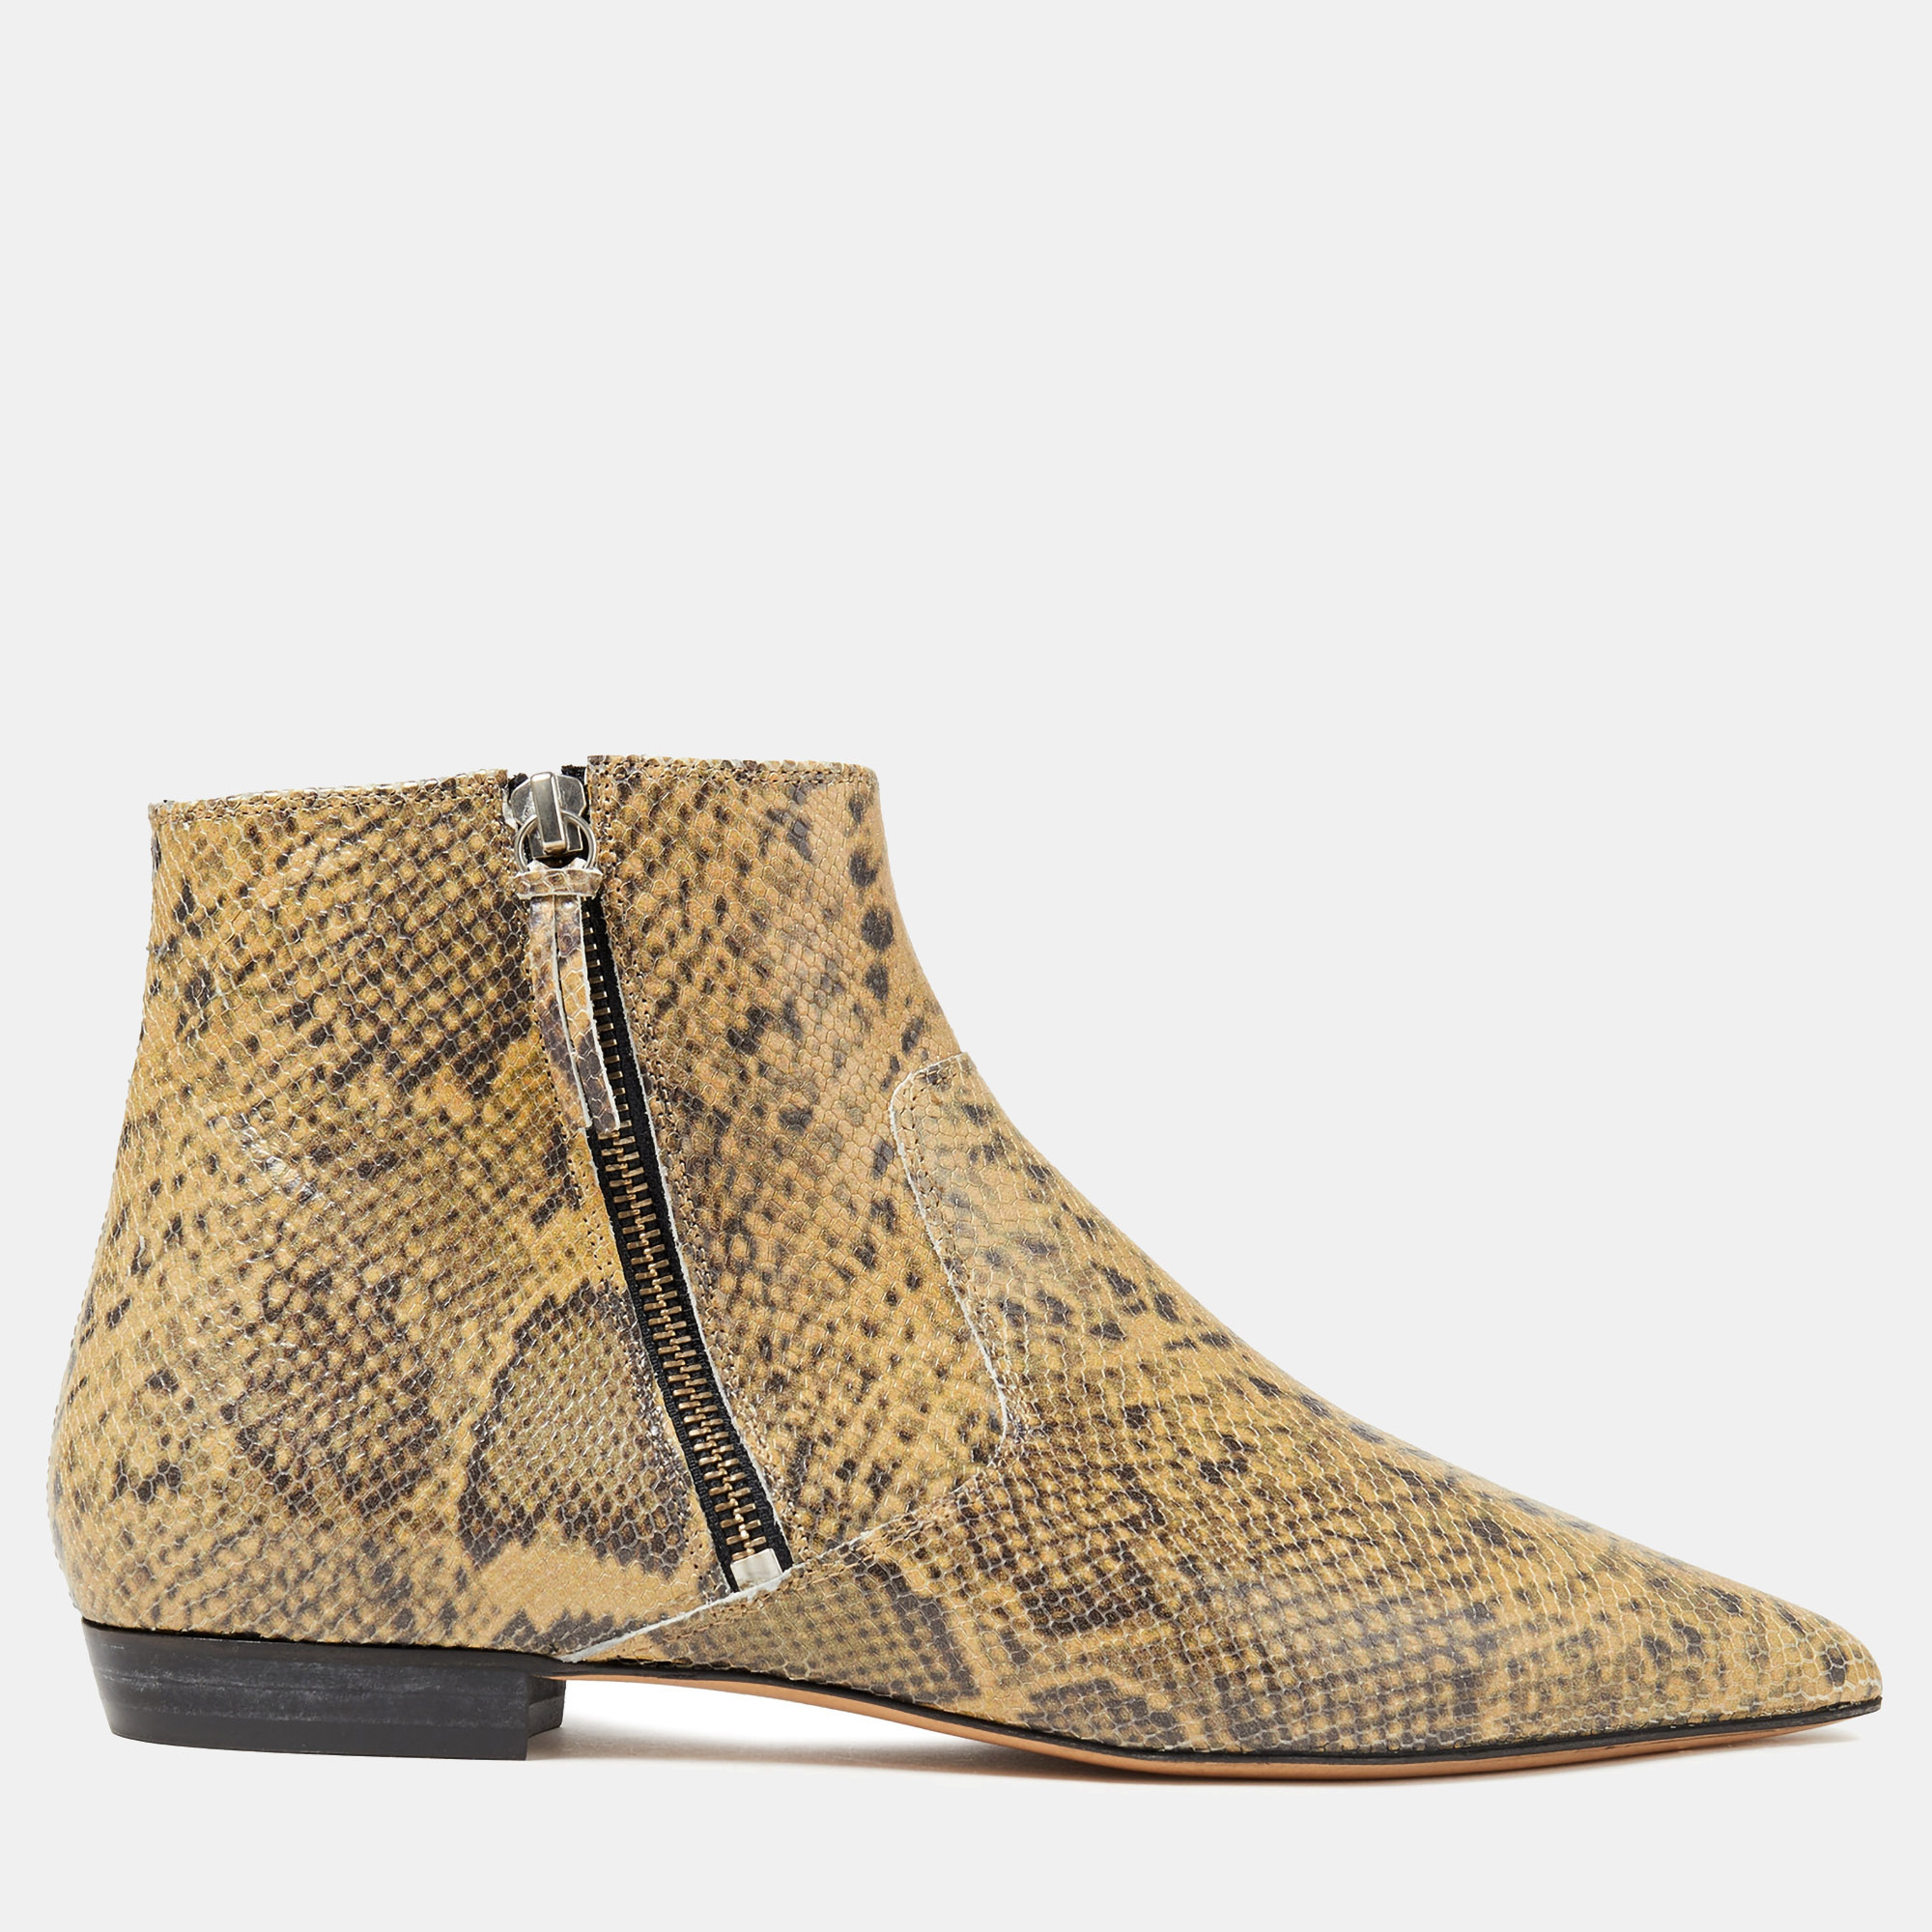 Isabel marant snakeskin embossed leather ankle boots size 36